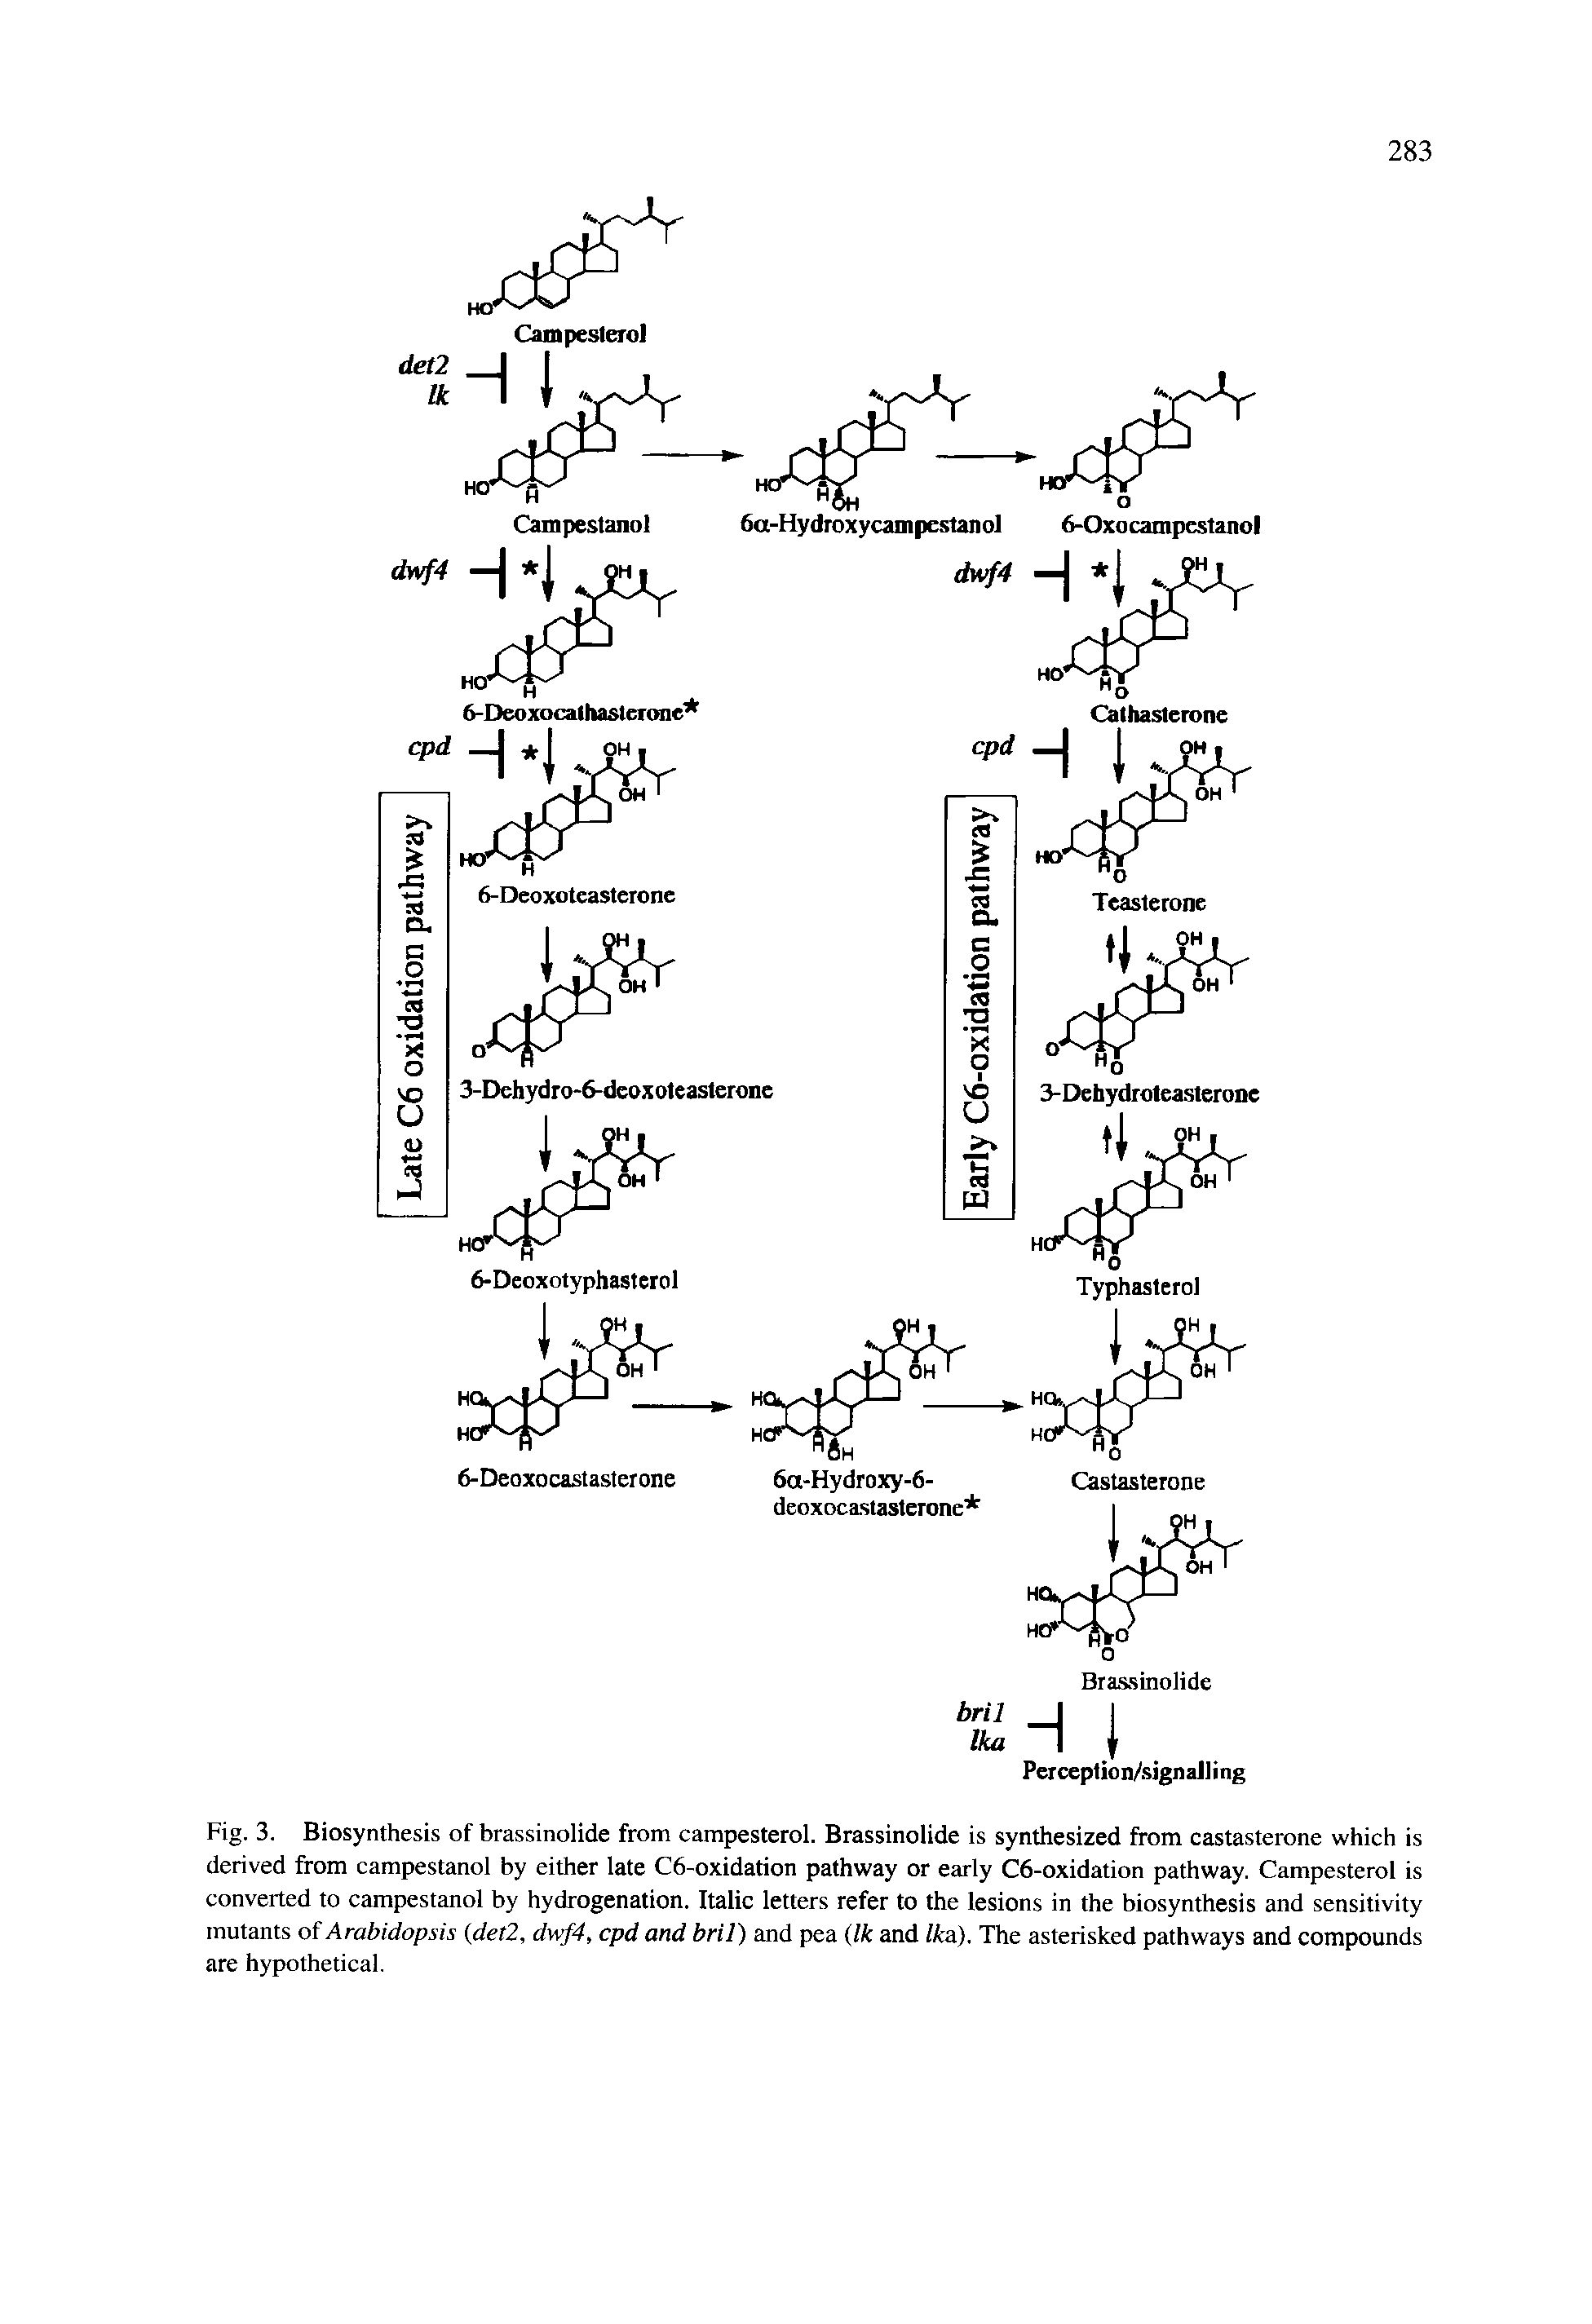 Fig. 3. Biosynthesis of brassinolide from campesterol. Brassinolide is synthesized from castasterone which is derived from campestanol by either late C6-oxidation pathway or early C6-oxidation pathway. Campesterol is converted to campestanol by hydrogenation. Italic letters refer to the lesions in the biosynthesis and sensitivity mutants of Arabidopsis det2, dwf4, cpd and bril) and pea (Ik and Ika). The asterisked pathways and compounds are hypothetical.